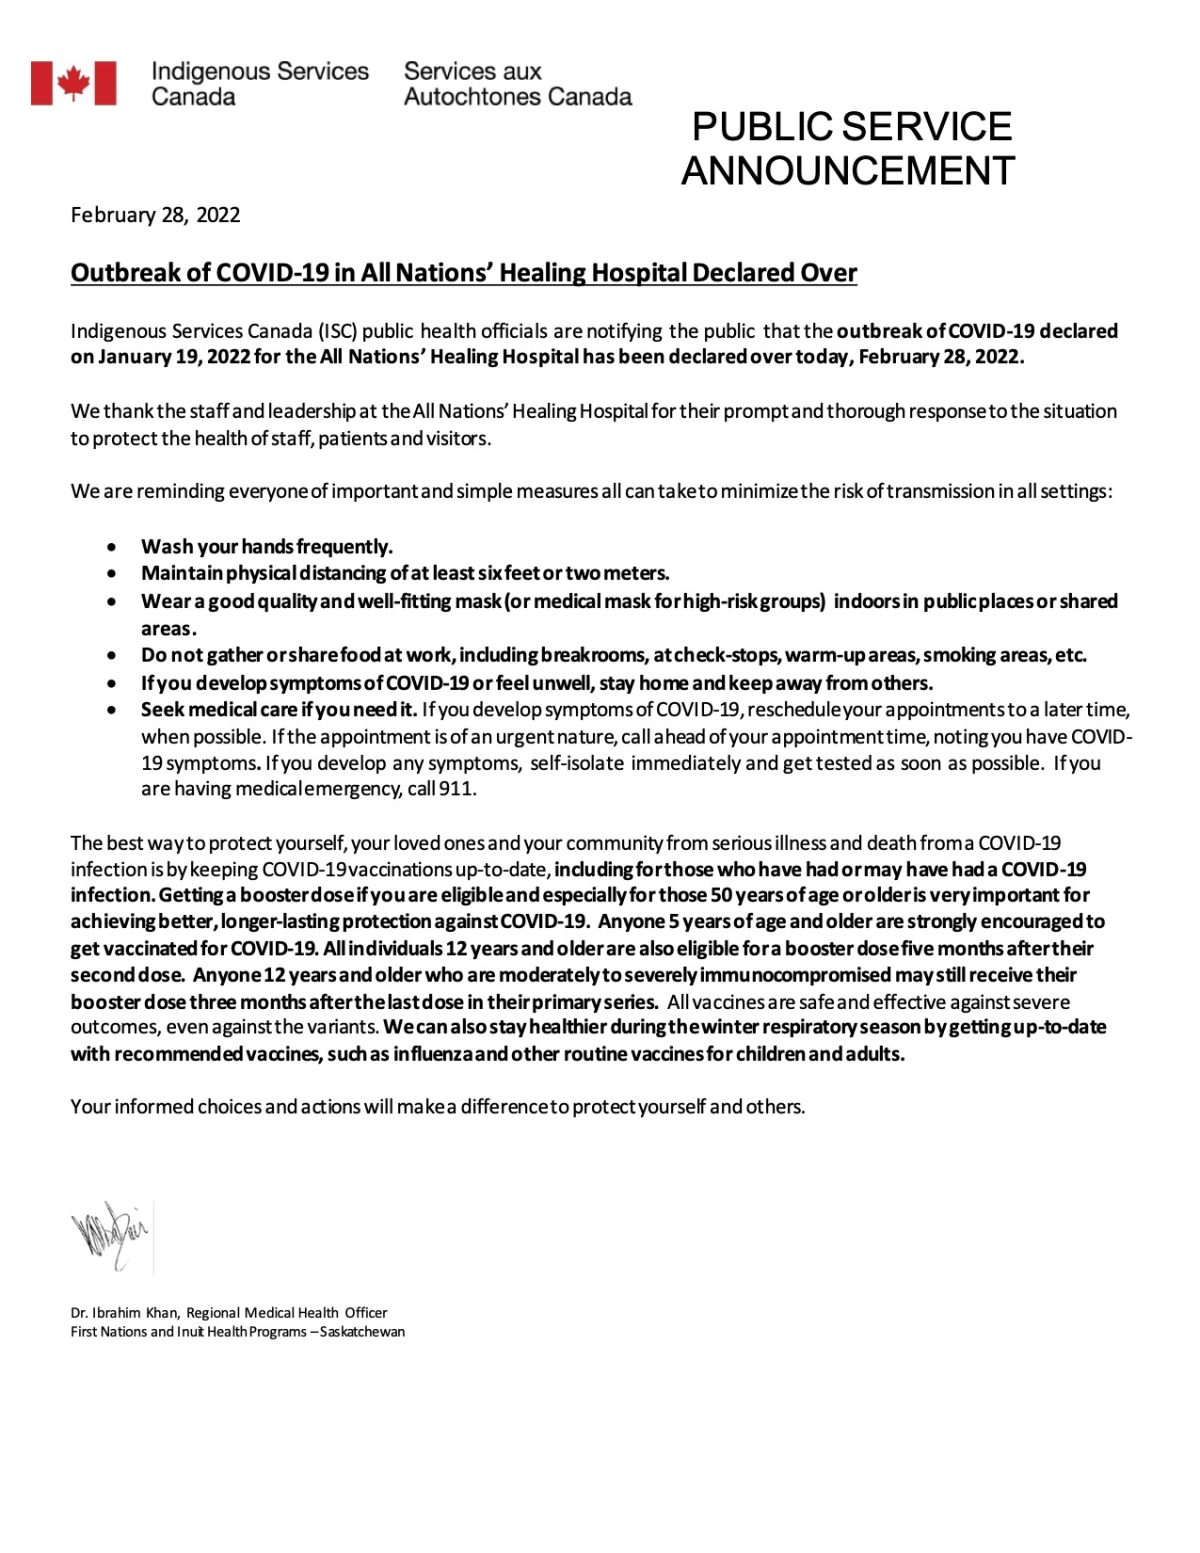 PSA-COVID-19-ISC-ANHH-Outbreak-Over-2022-02-28-Facility-1-1200x1553.jpg